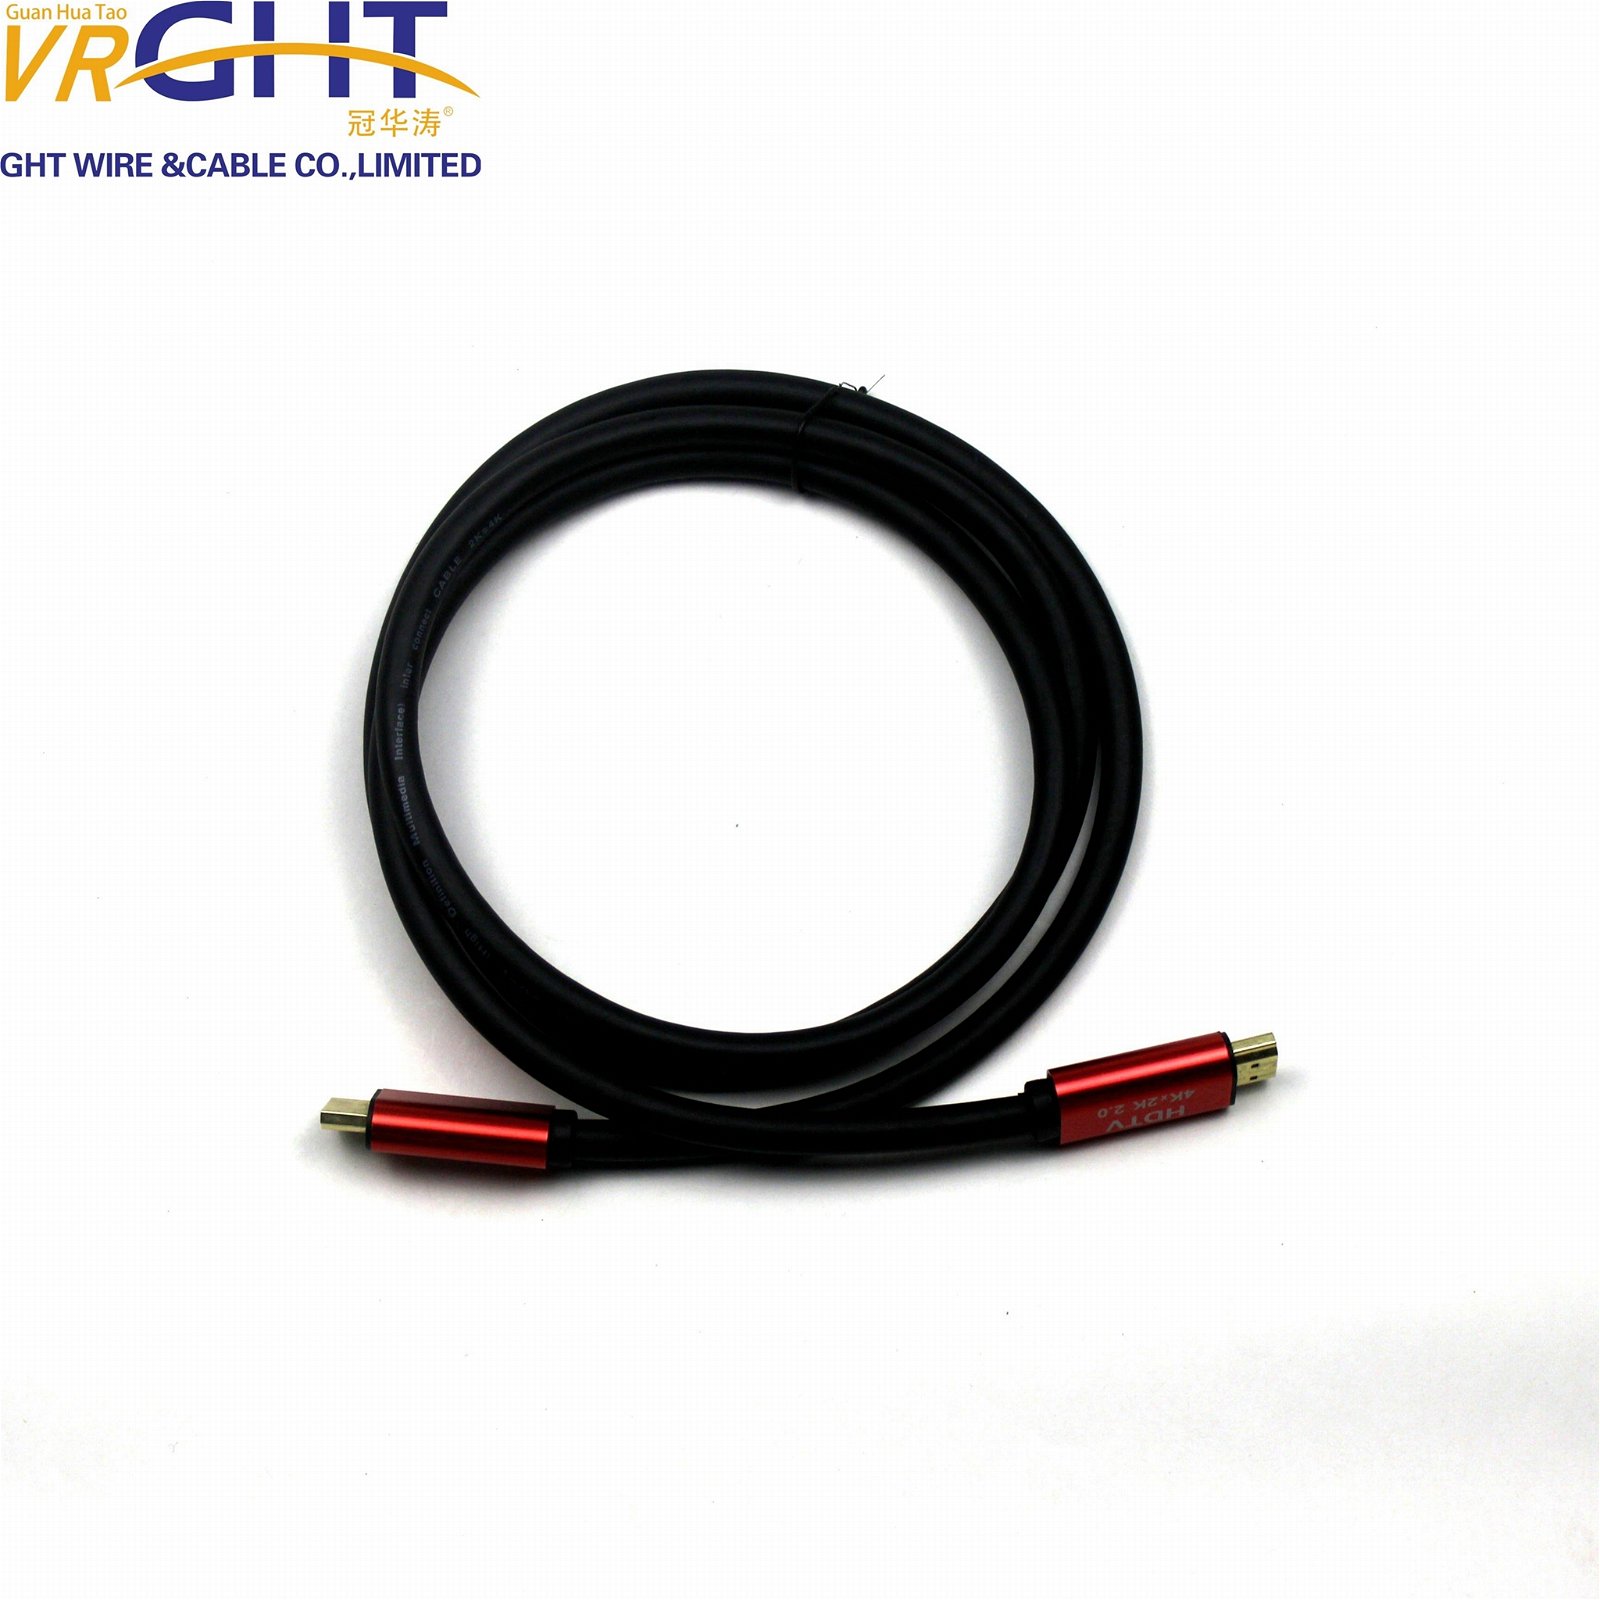  19+1 HDMI CABLE RED ALLOY 2